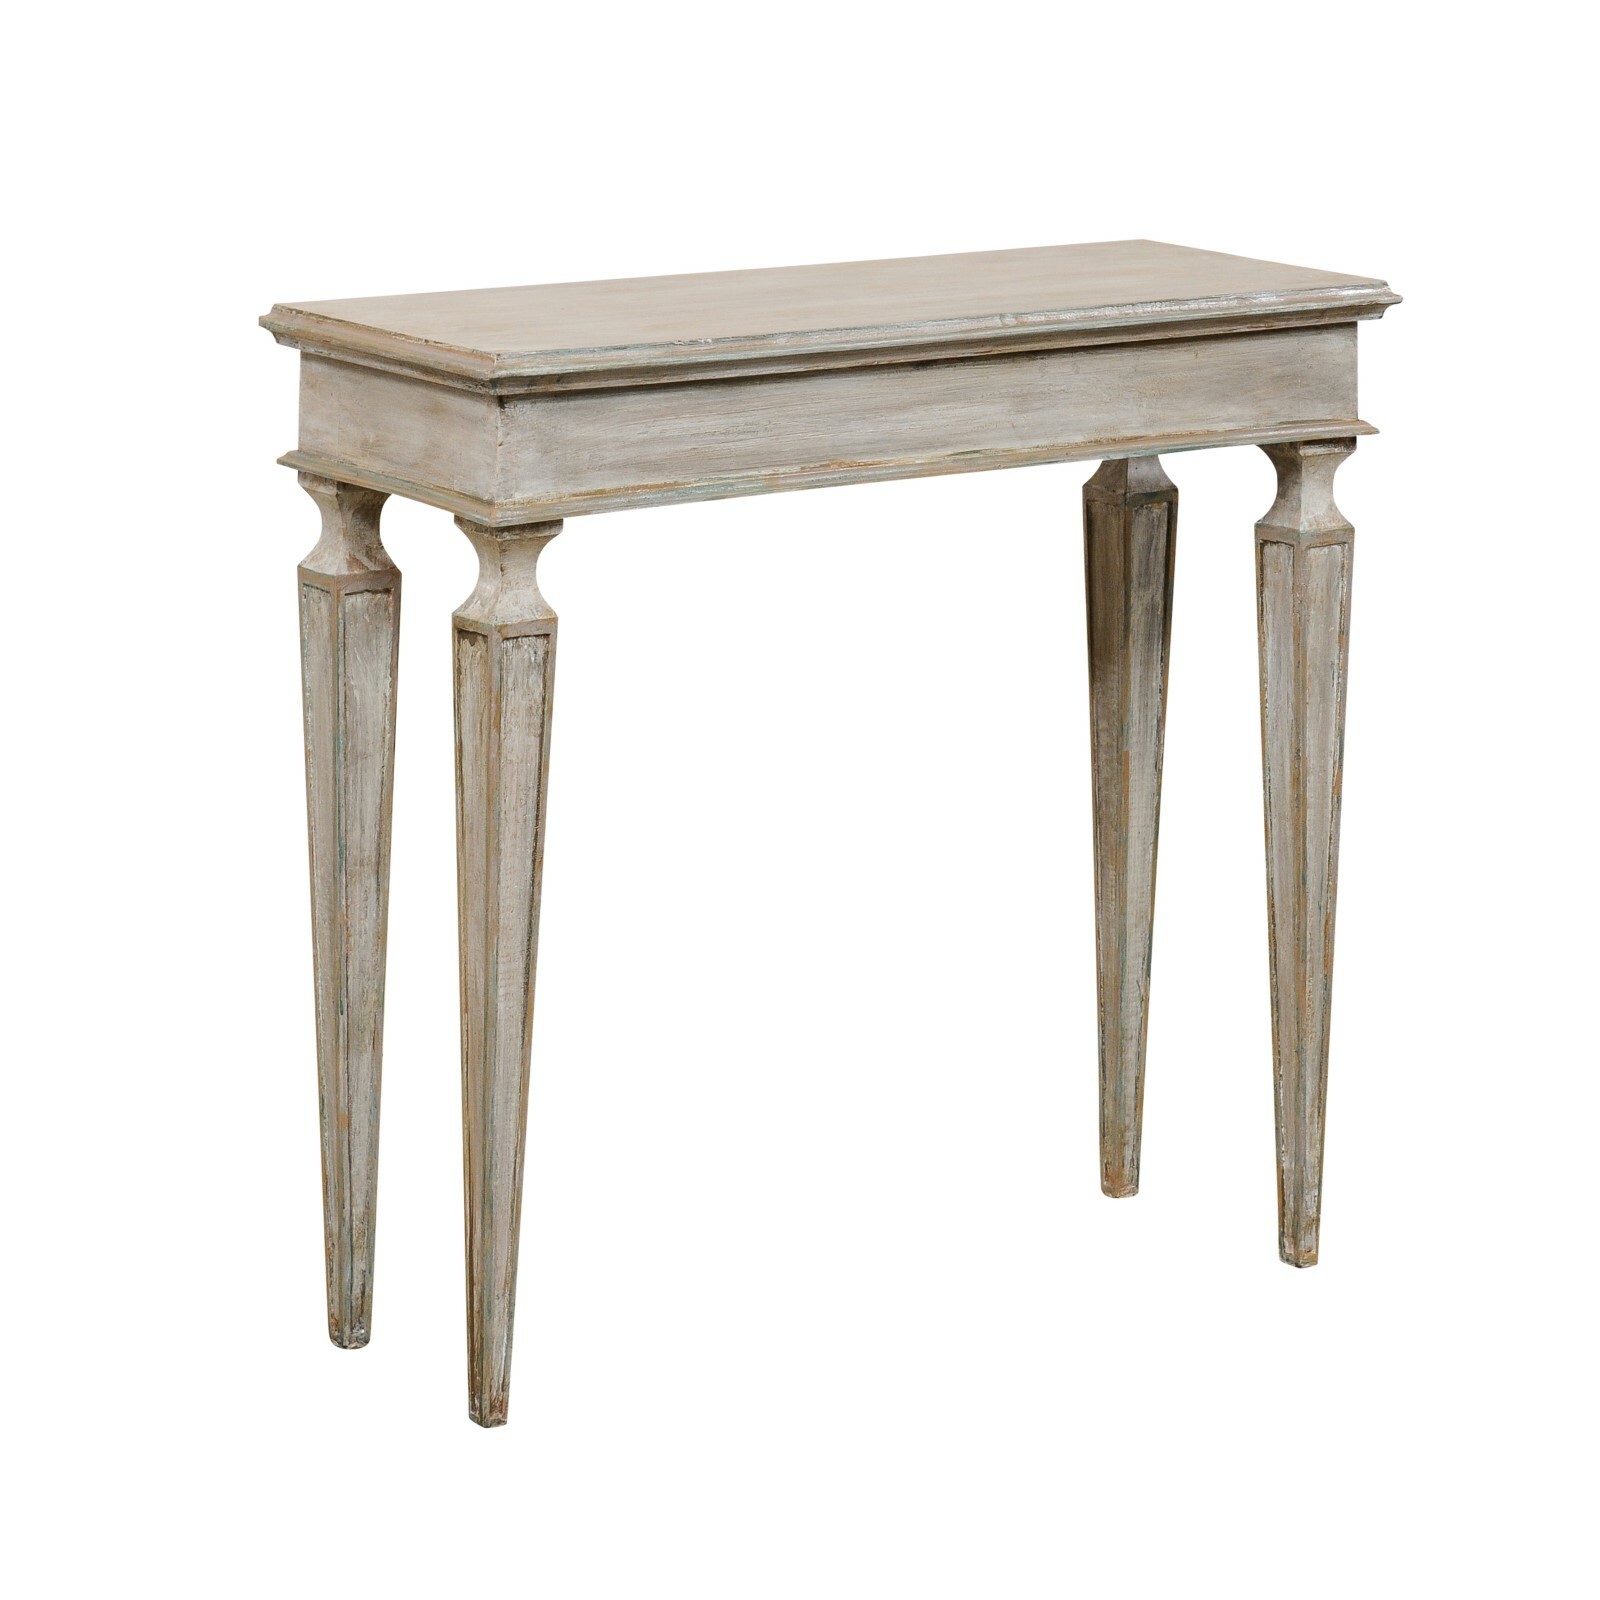 Italian Painted Wood Console Table, 3 Ft W